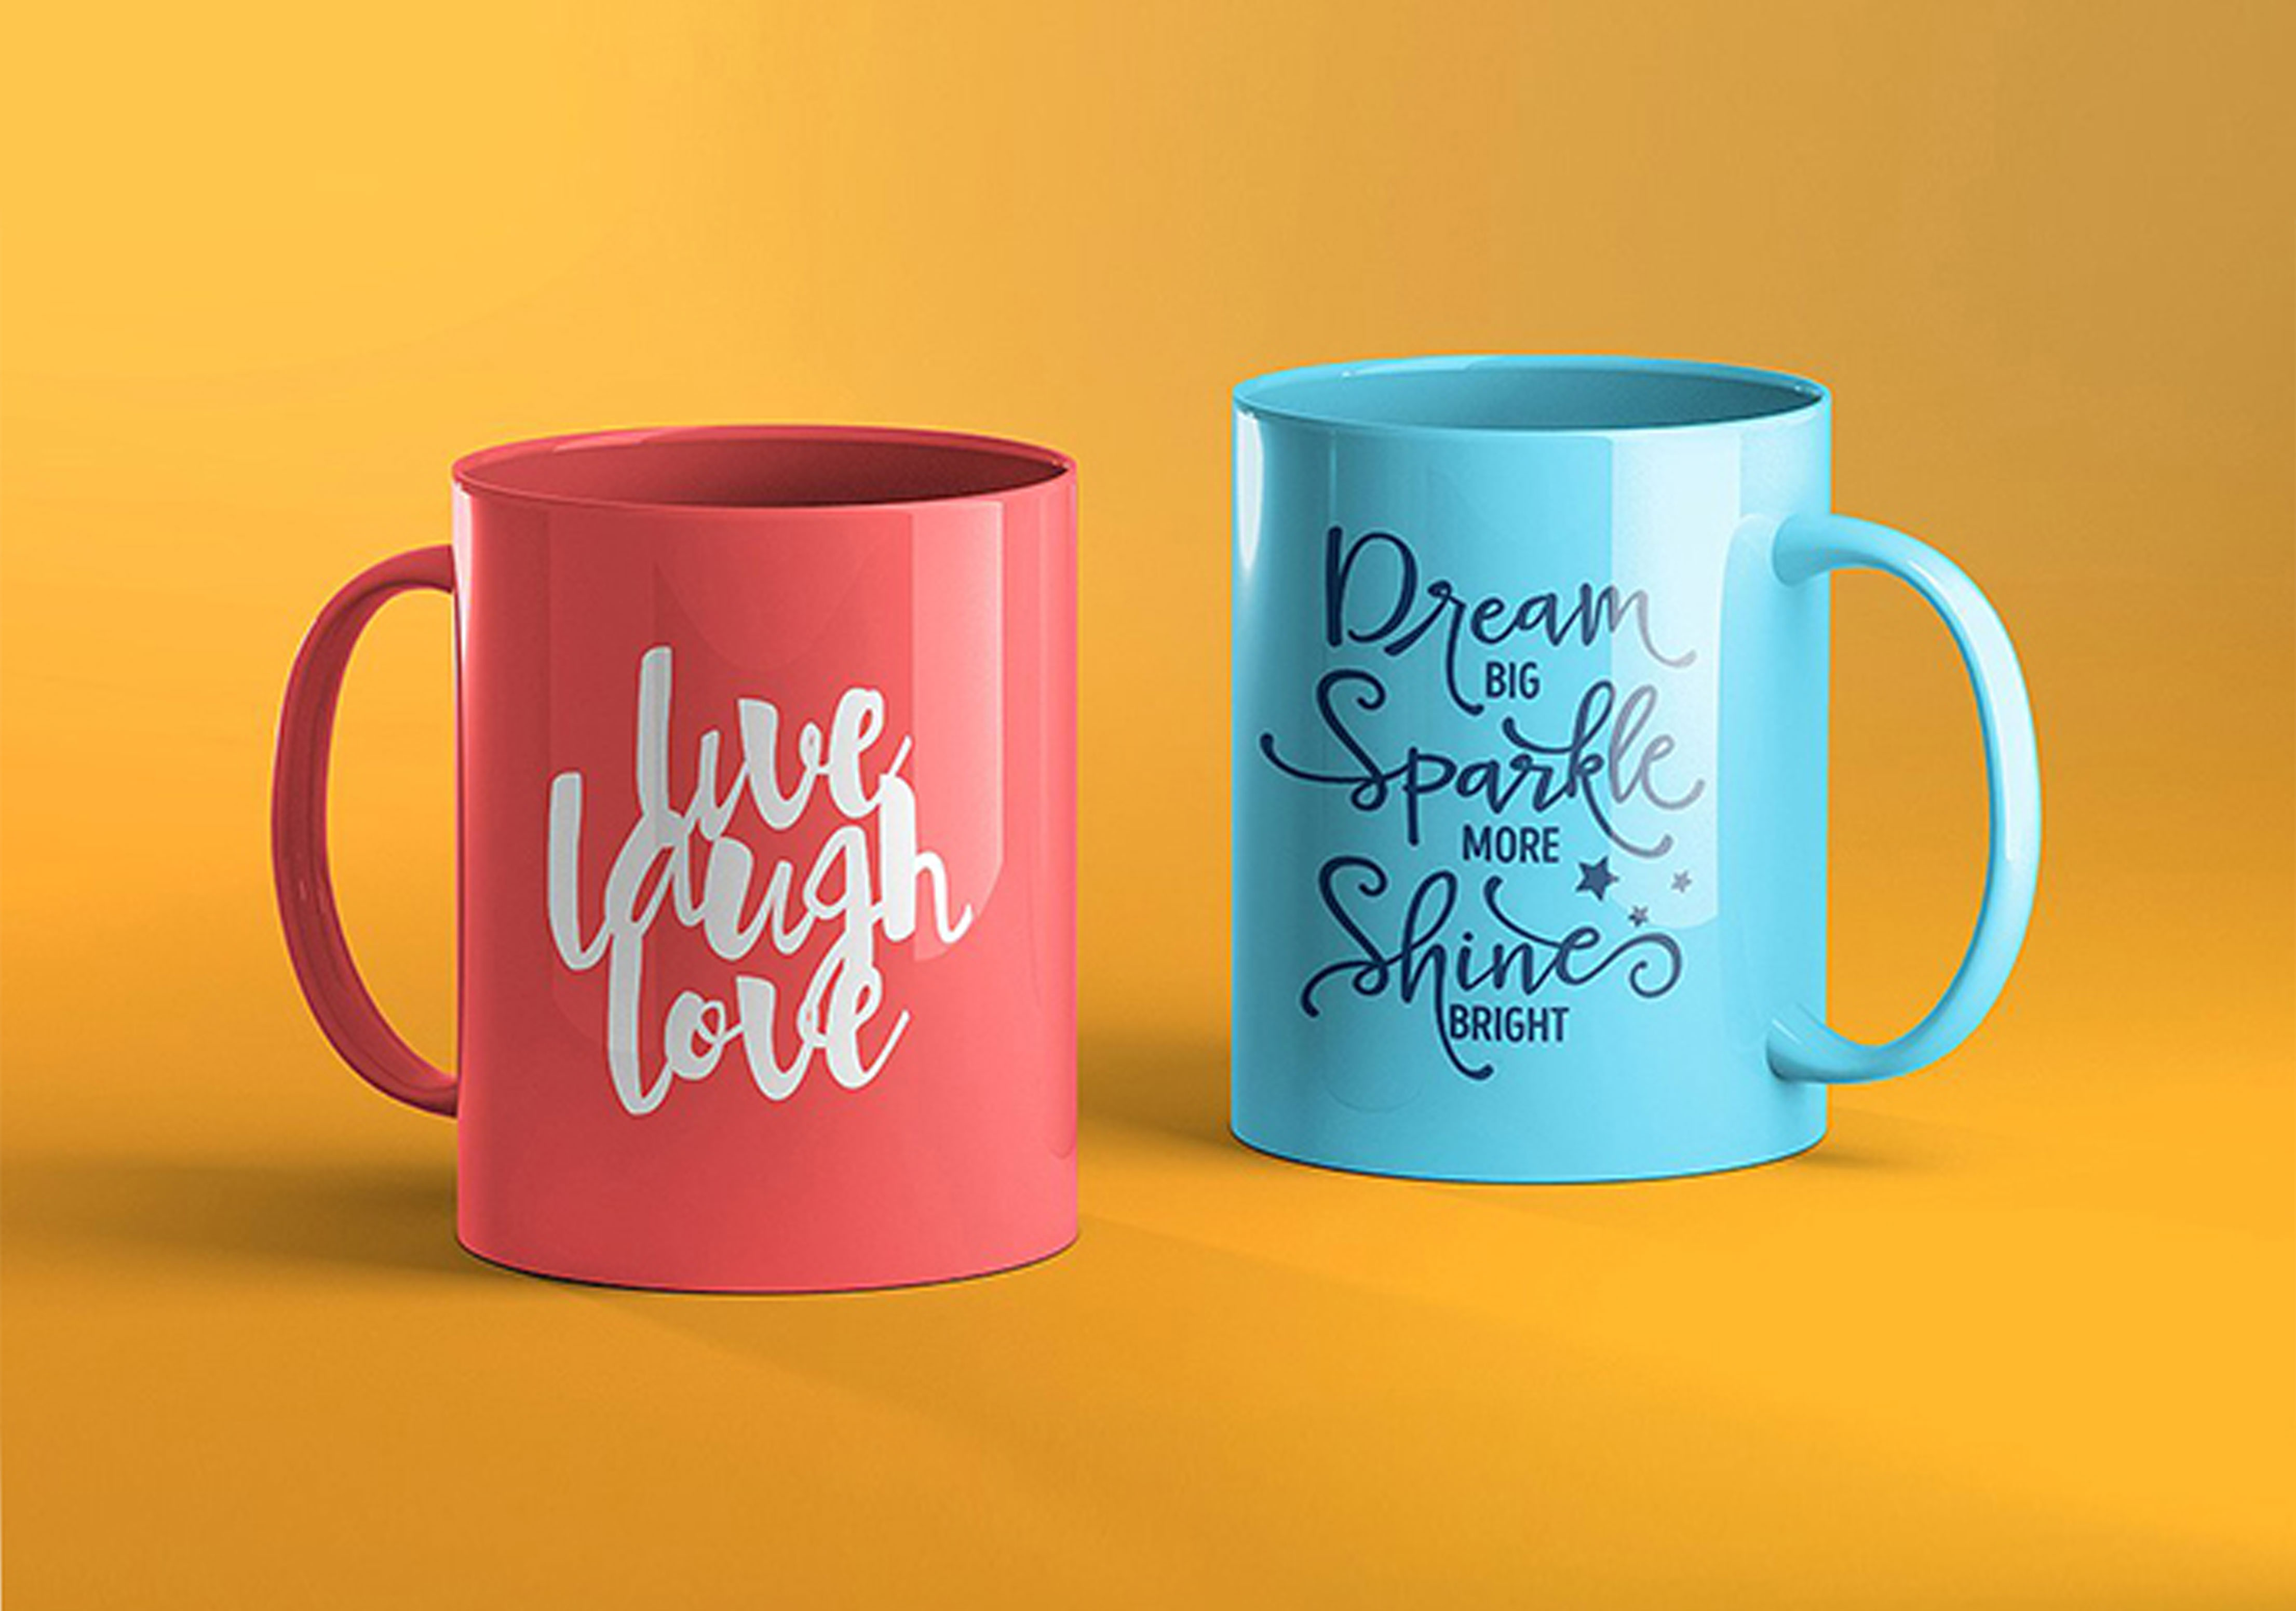 Customized Mugs at Golden Point adds 